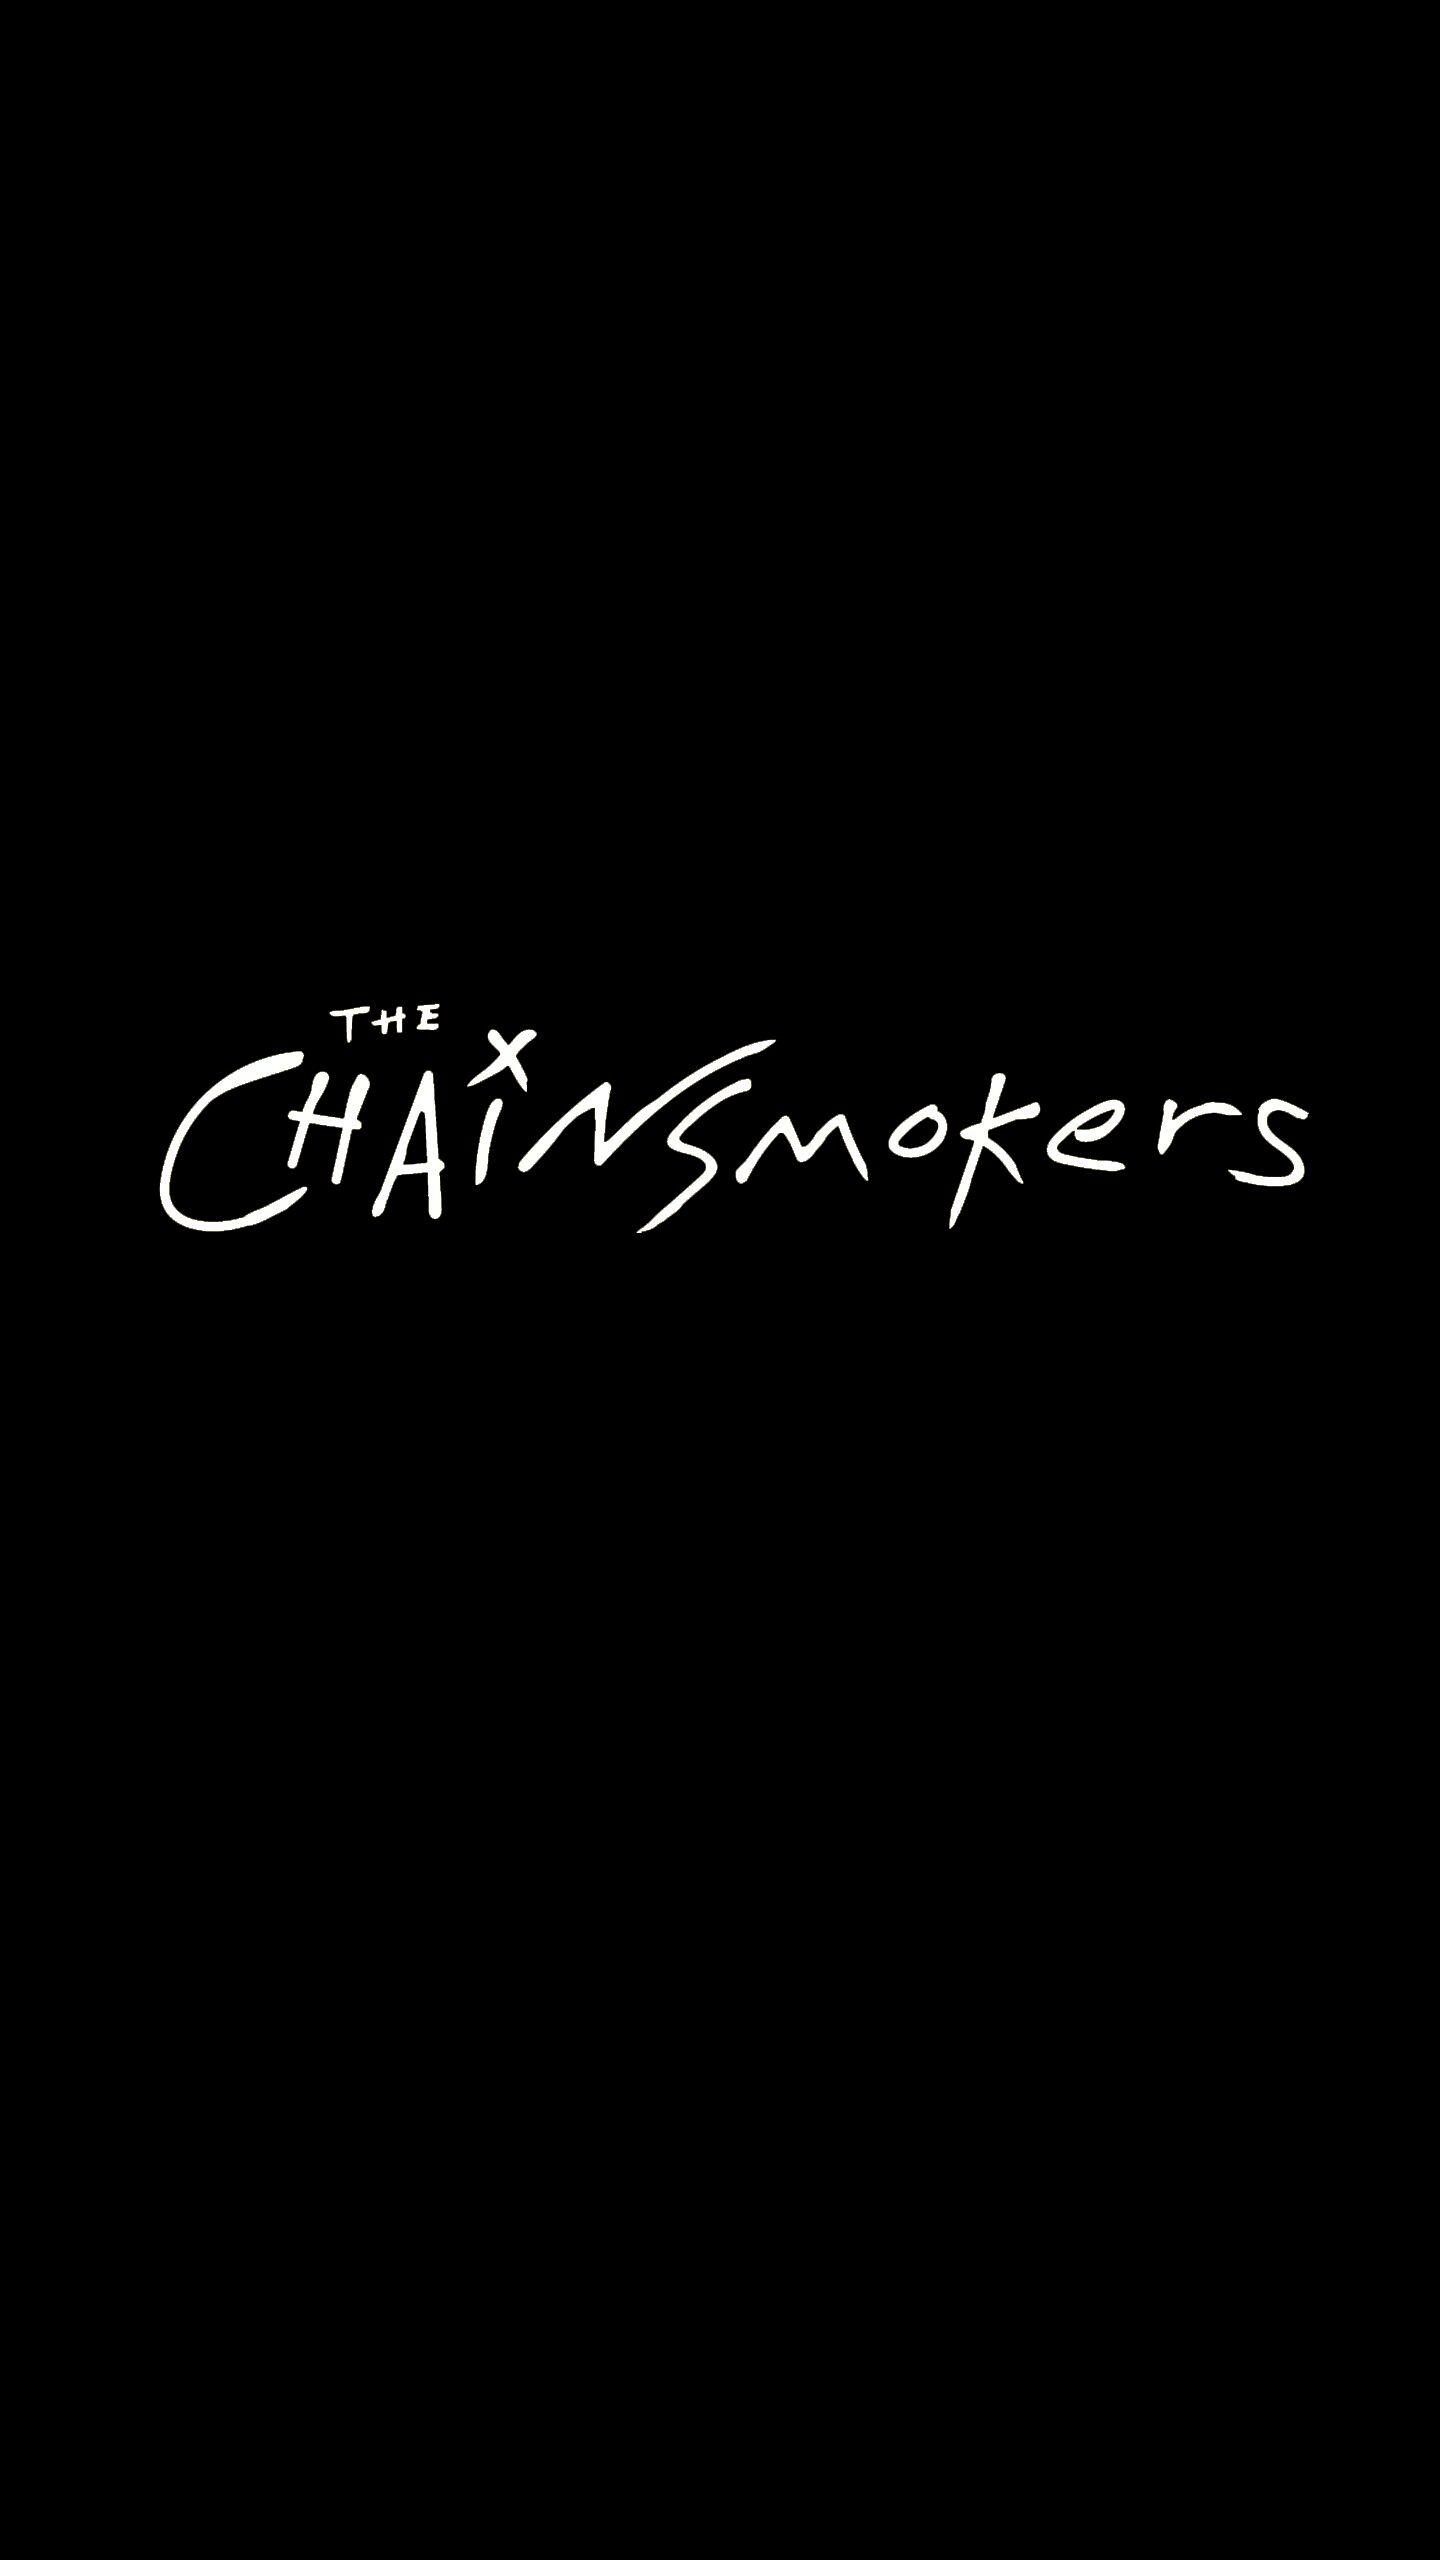 The Chainsmokers, Iconic logo, Recognizable branding, Music identity, 1440x2560 HD Phone